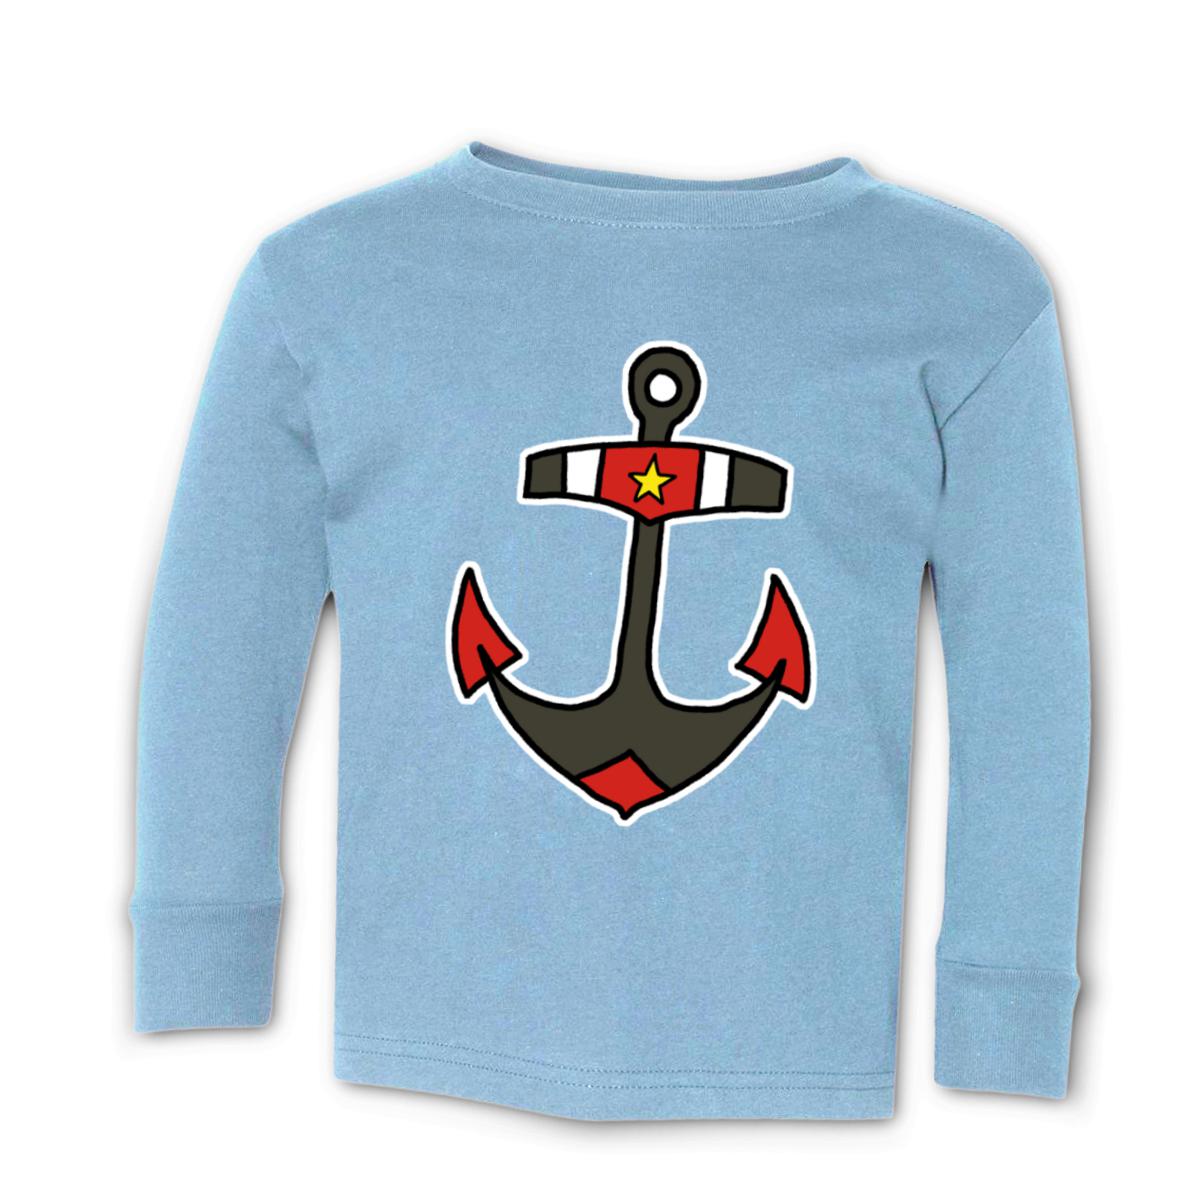 American Traditional Anchor Toddler Long Sleeve Tee 4T light-blue